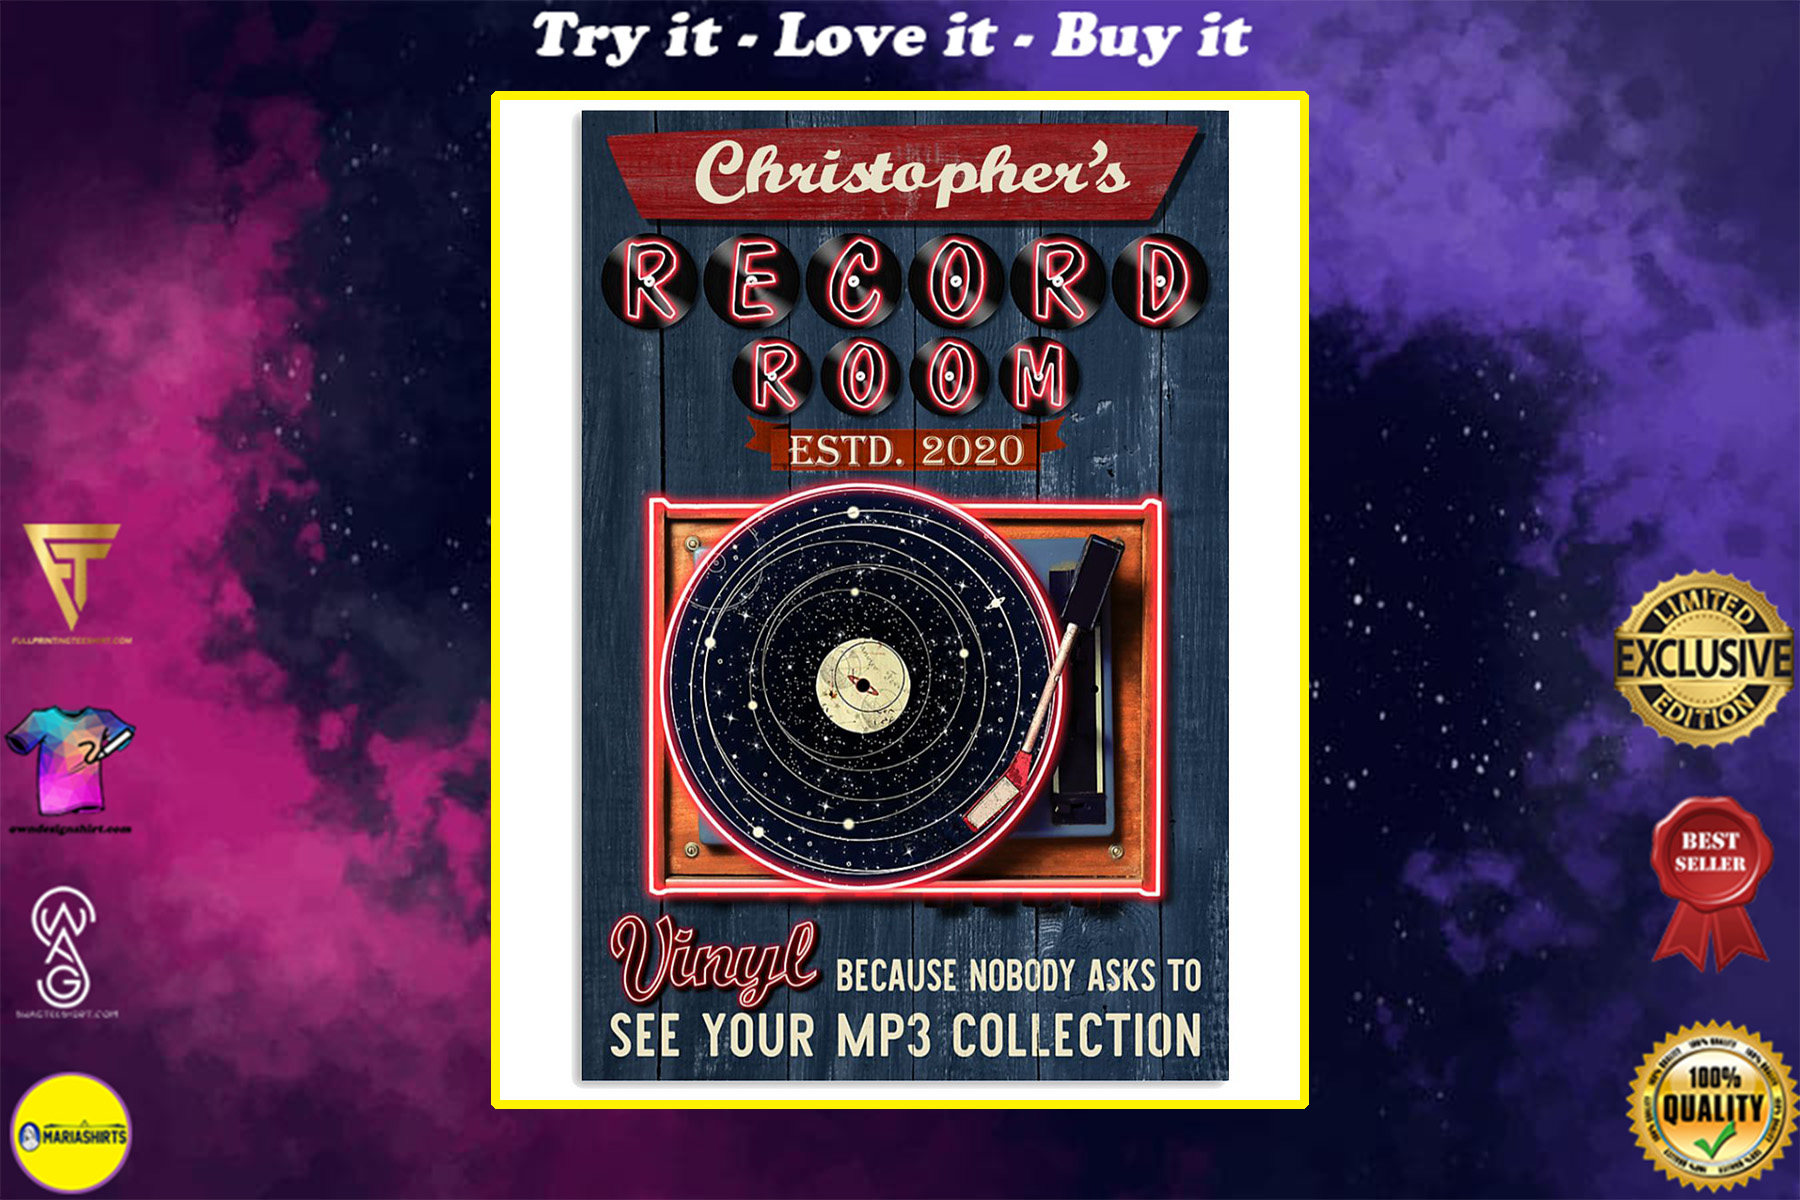 custom your name record room vinyl vintage poster